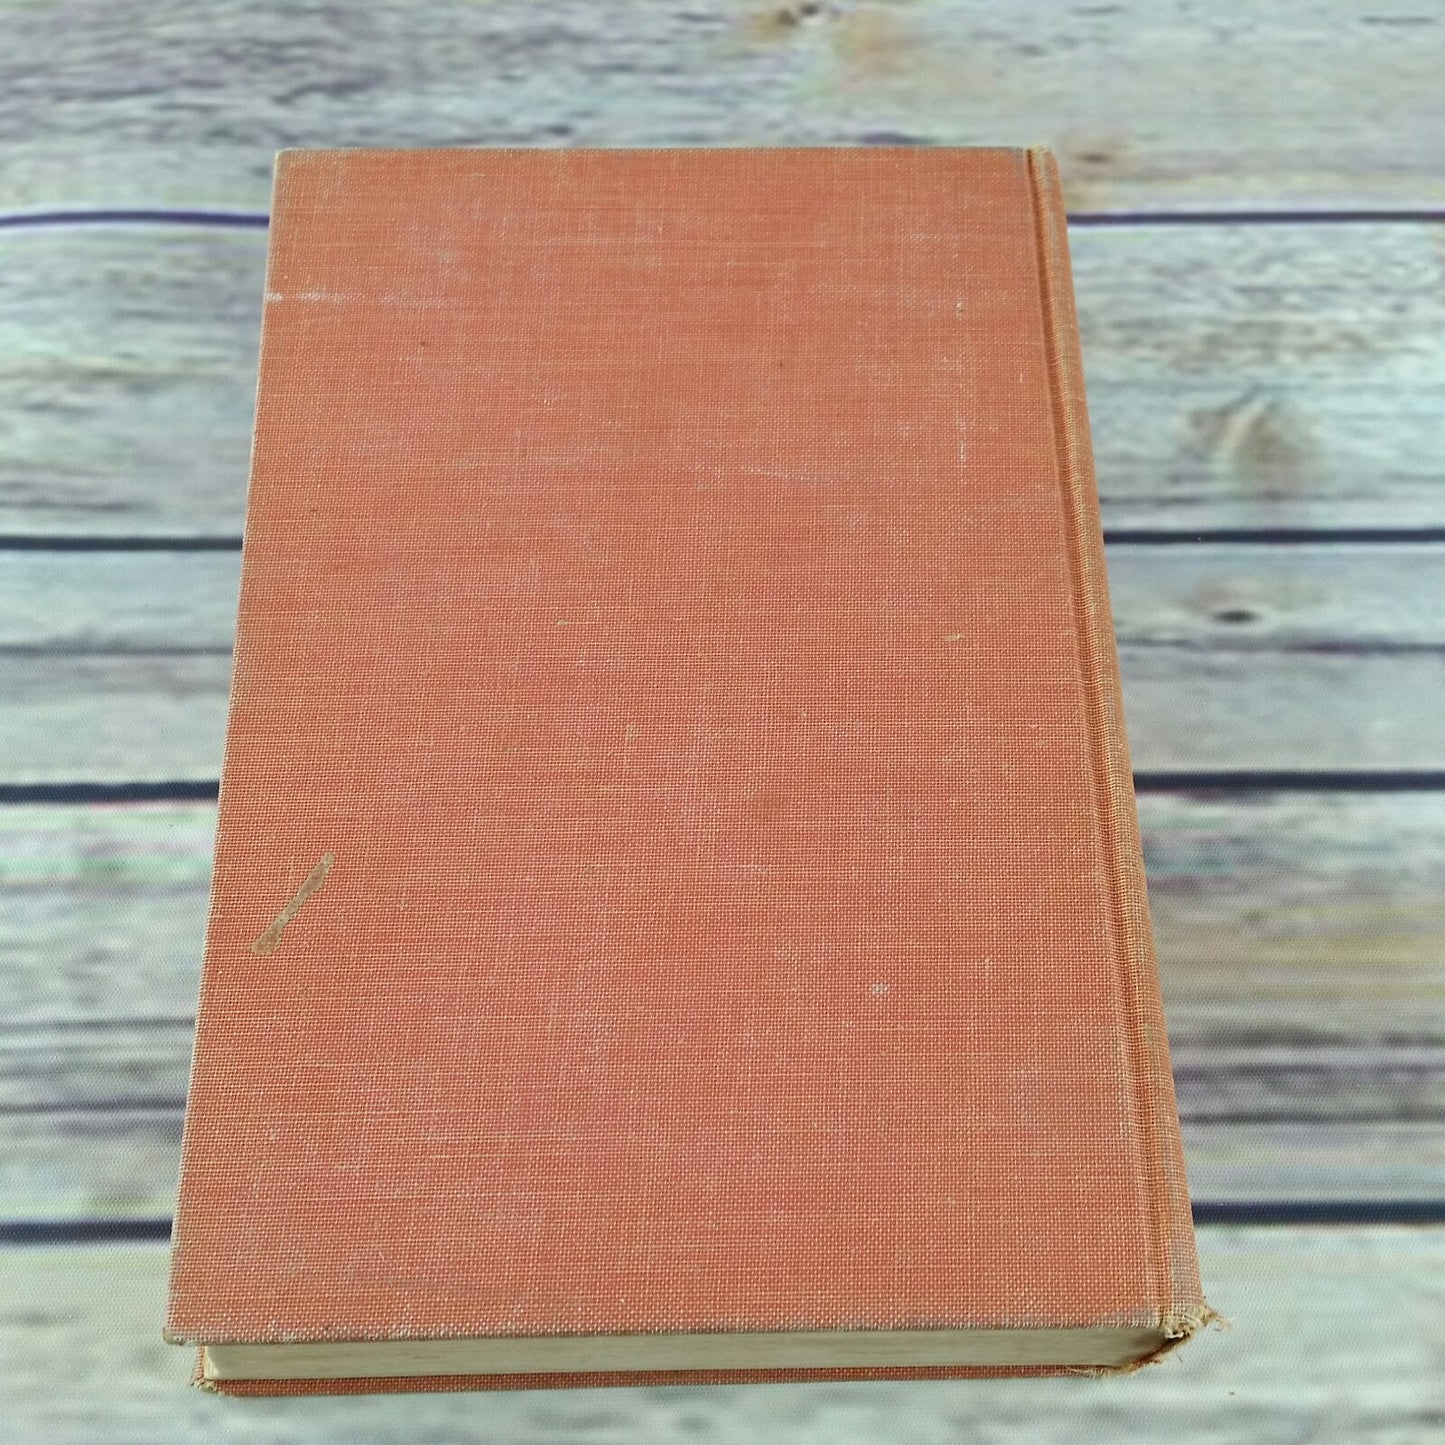 Vintage Cookbook Andre Simon's French Cook Book 1938 Hardcover No Dust Jacket First Edition - At Grandma's Table